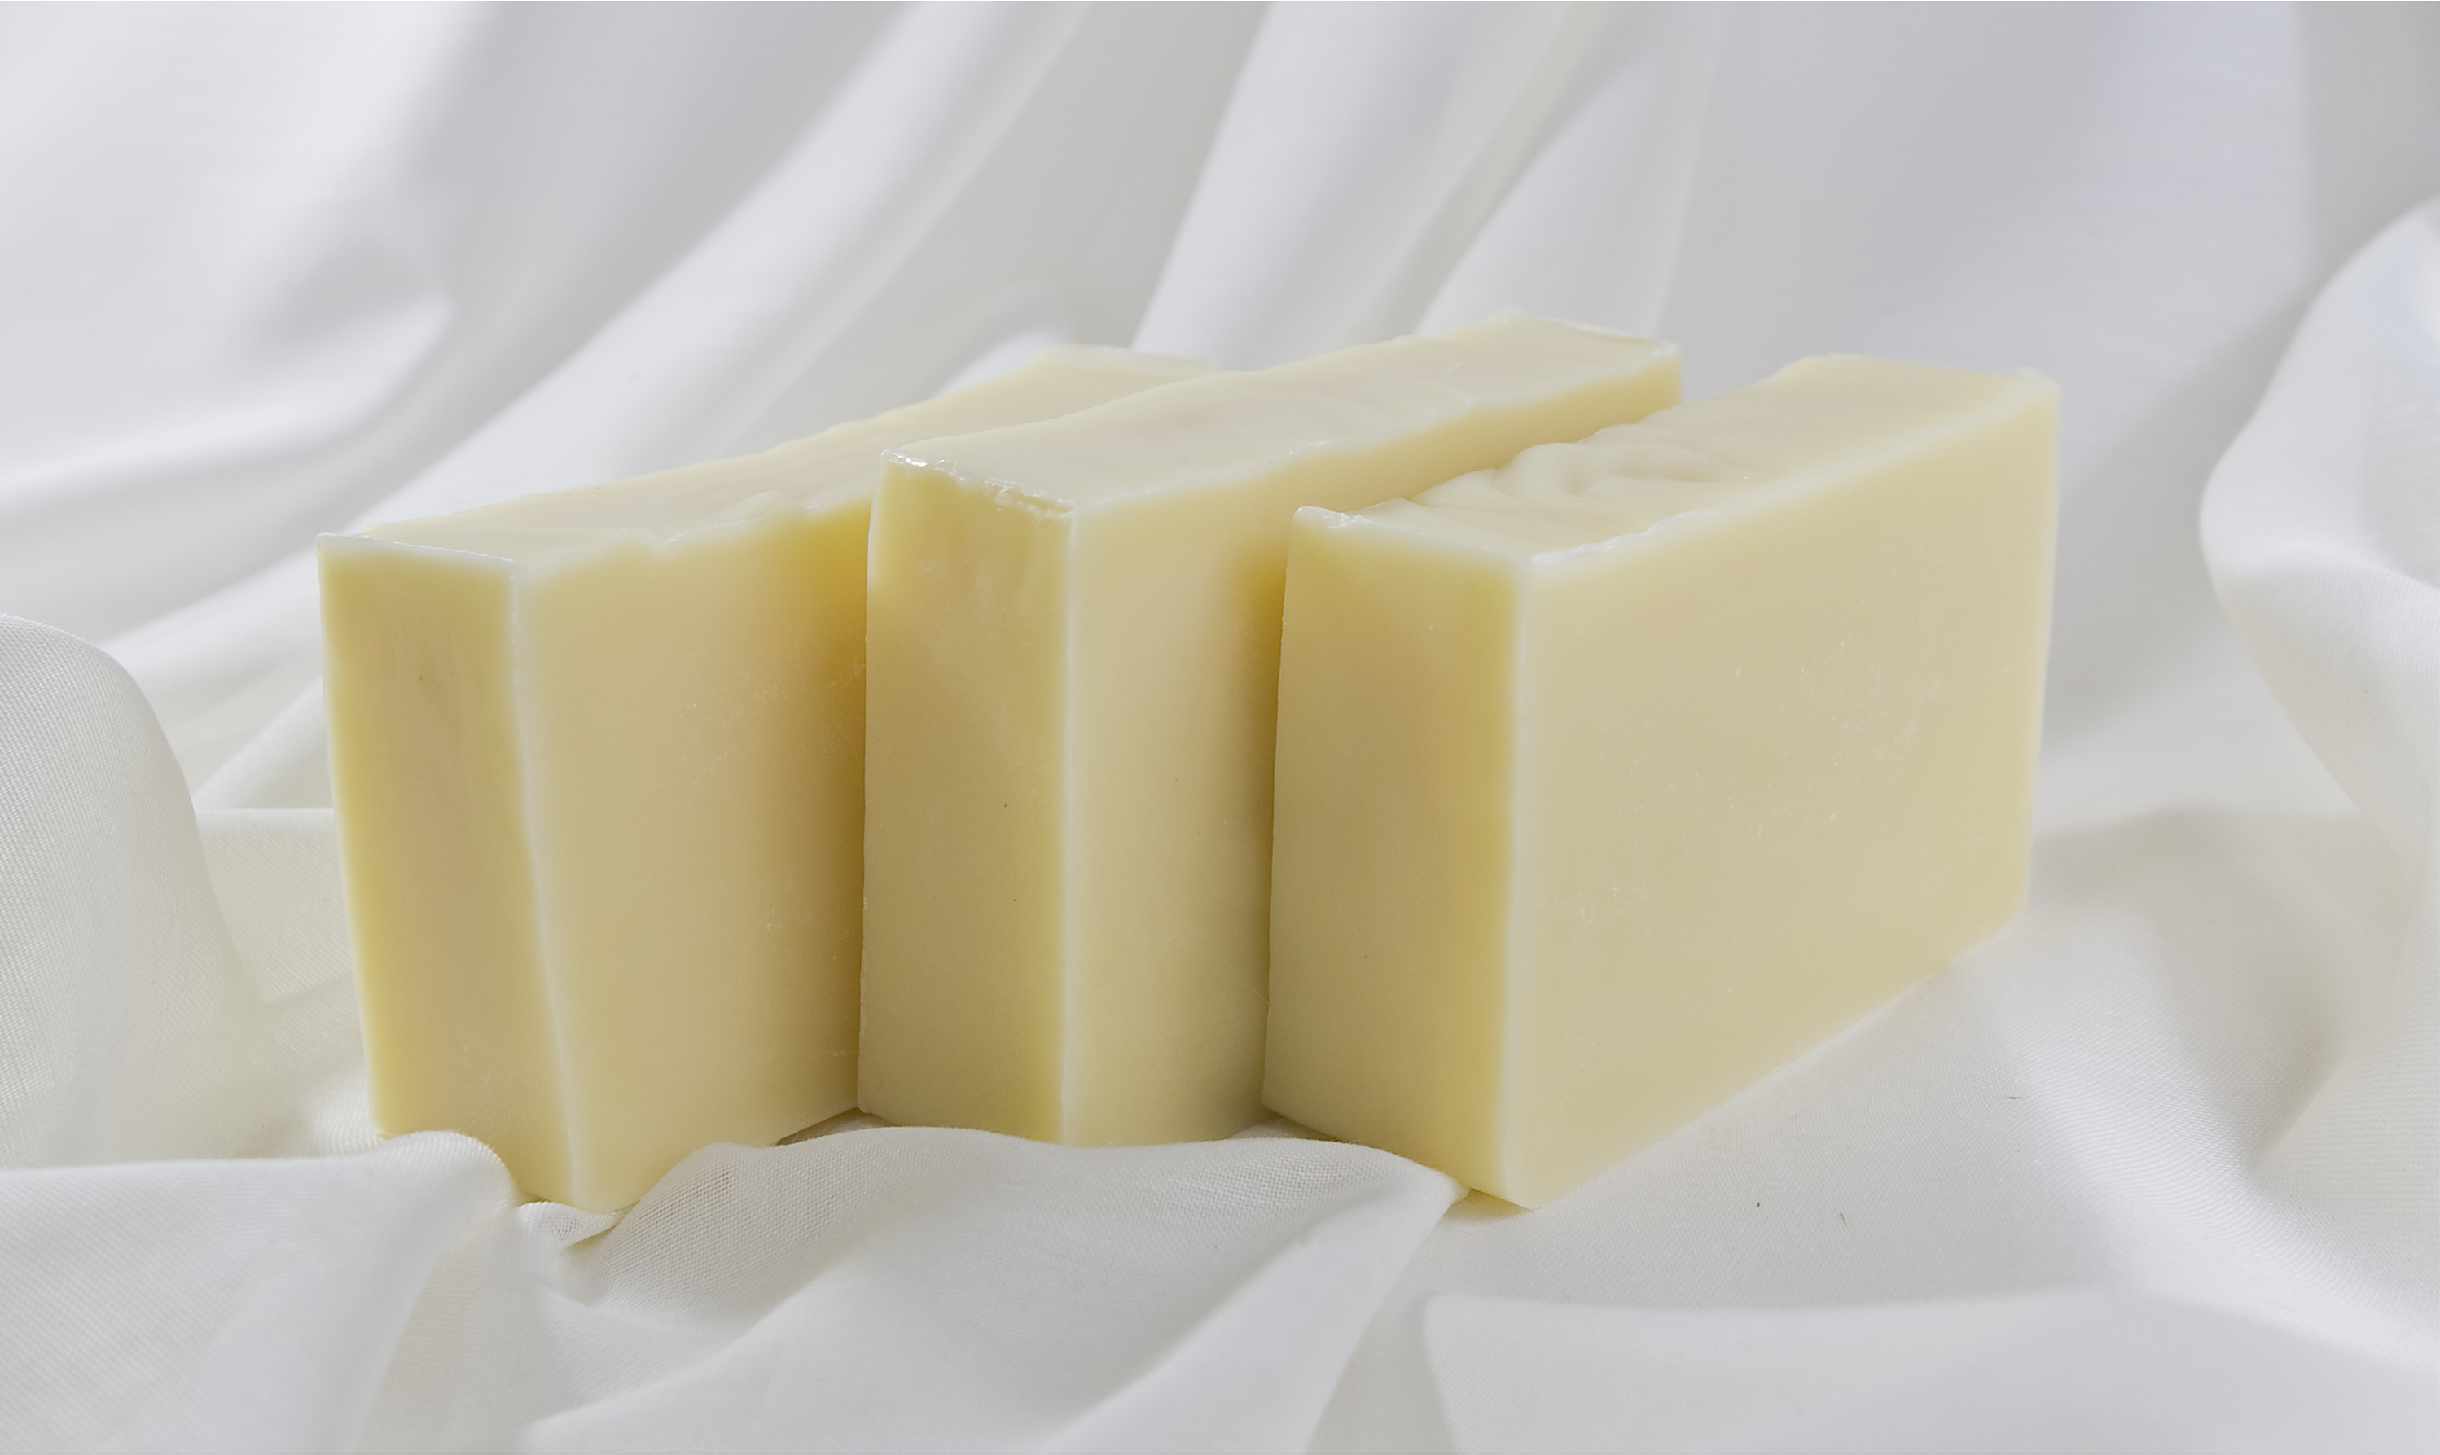 Discover Seven Simple Reasons for Making Soap Instead of Having to Buy it